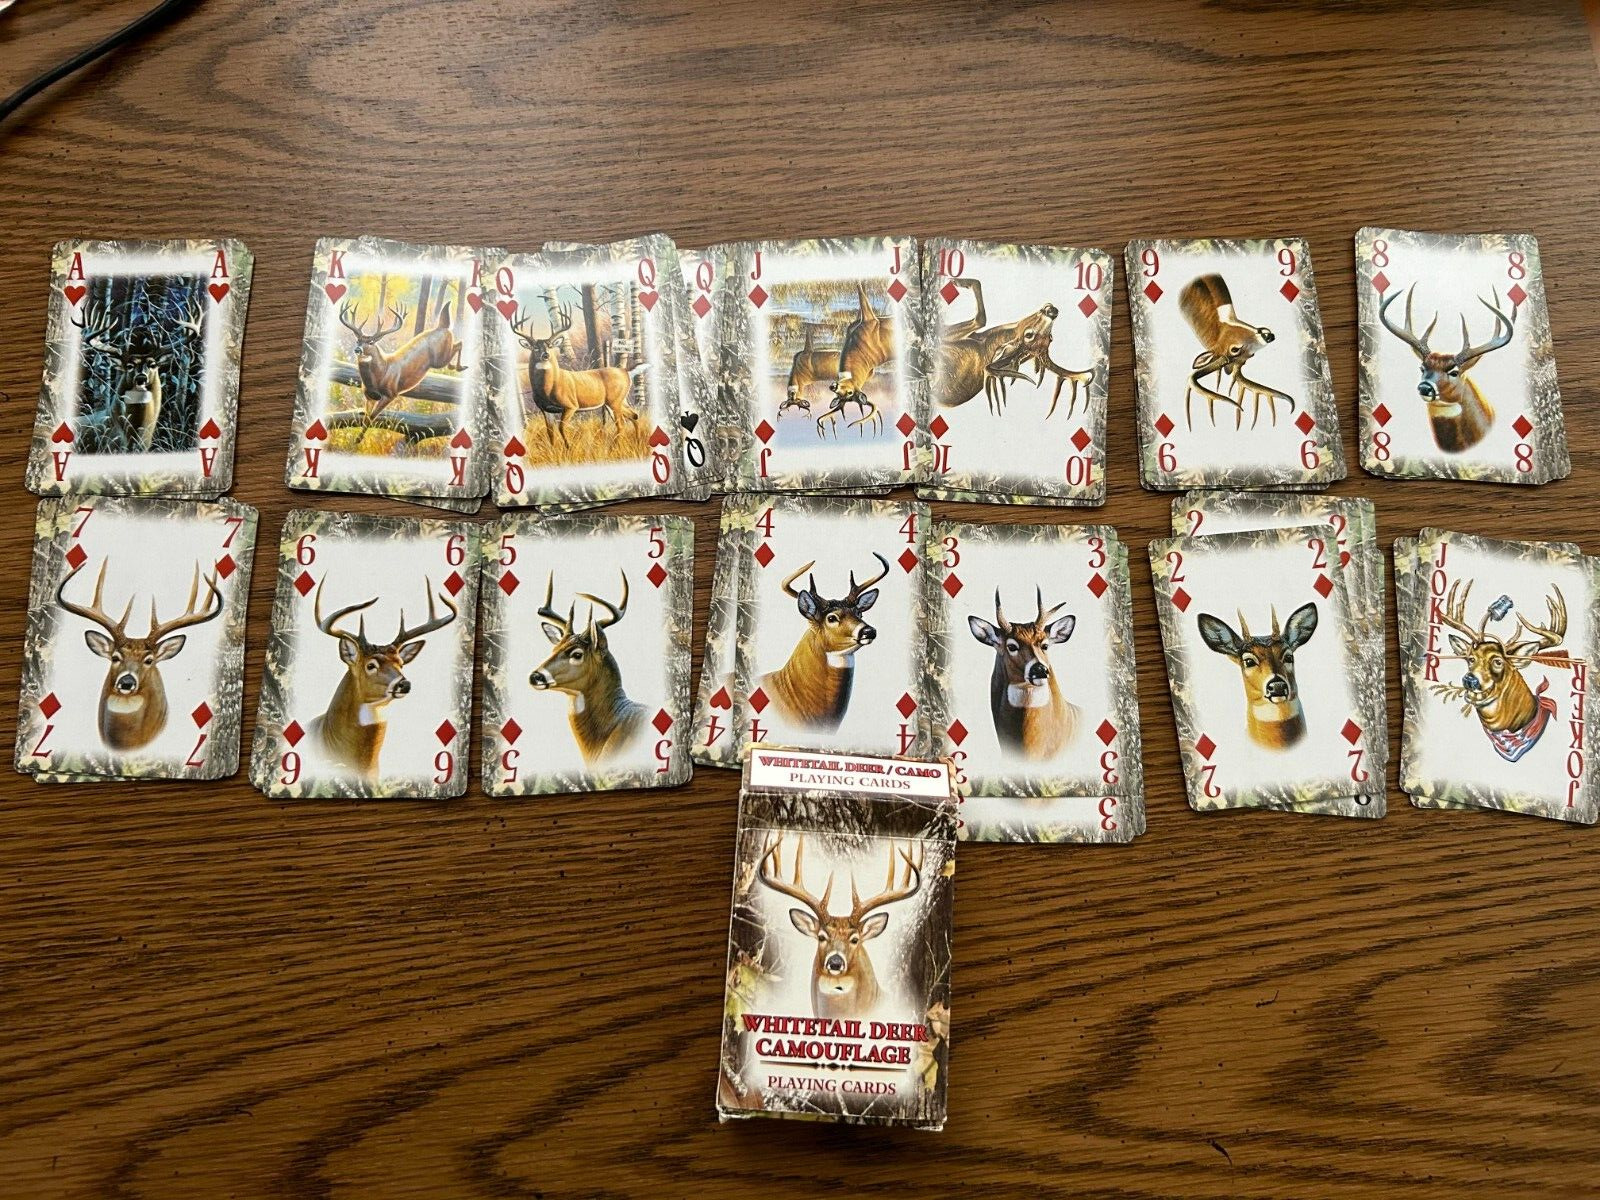 Whitetail Deer Camouflage Playing Cards Complete cards never used